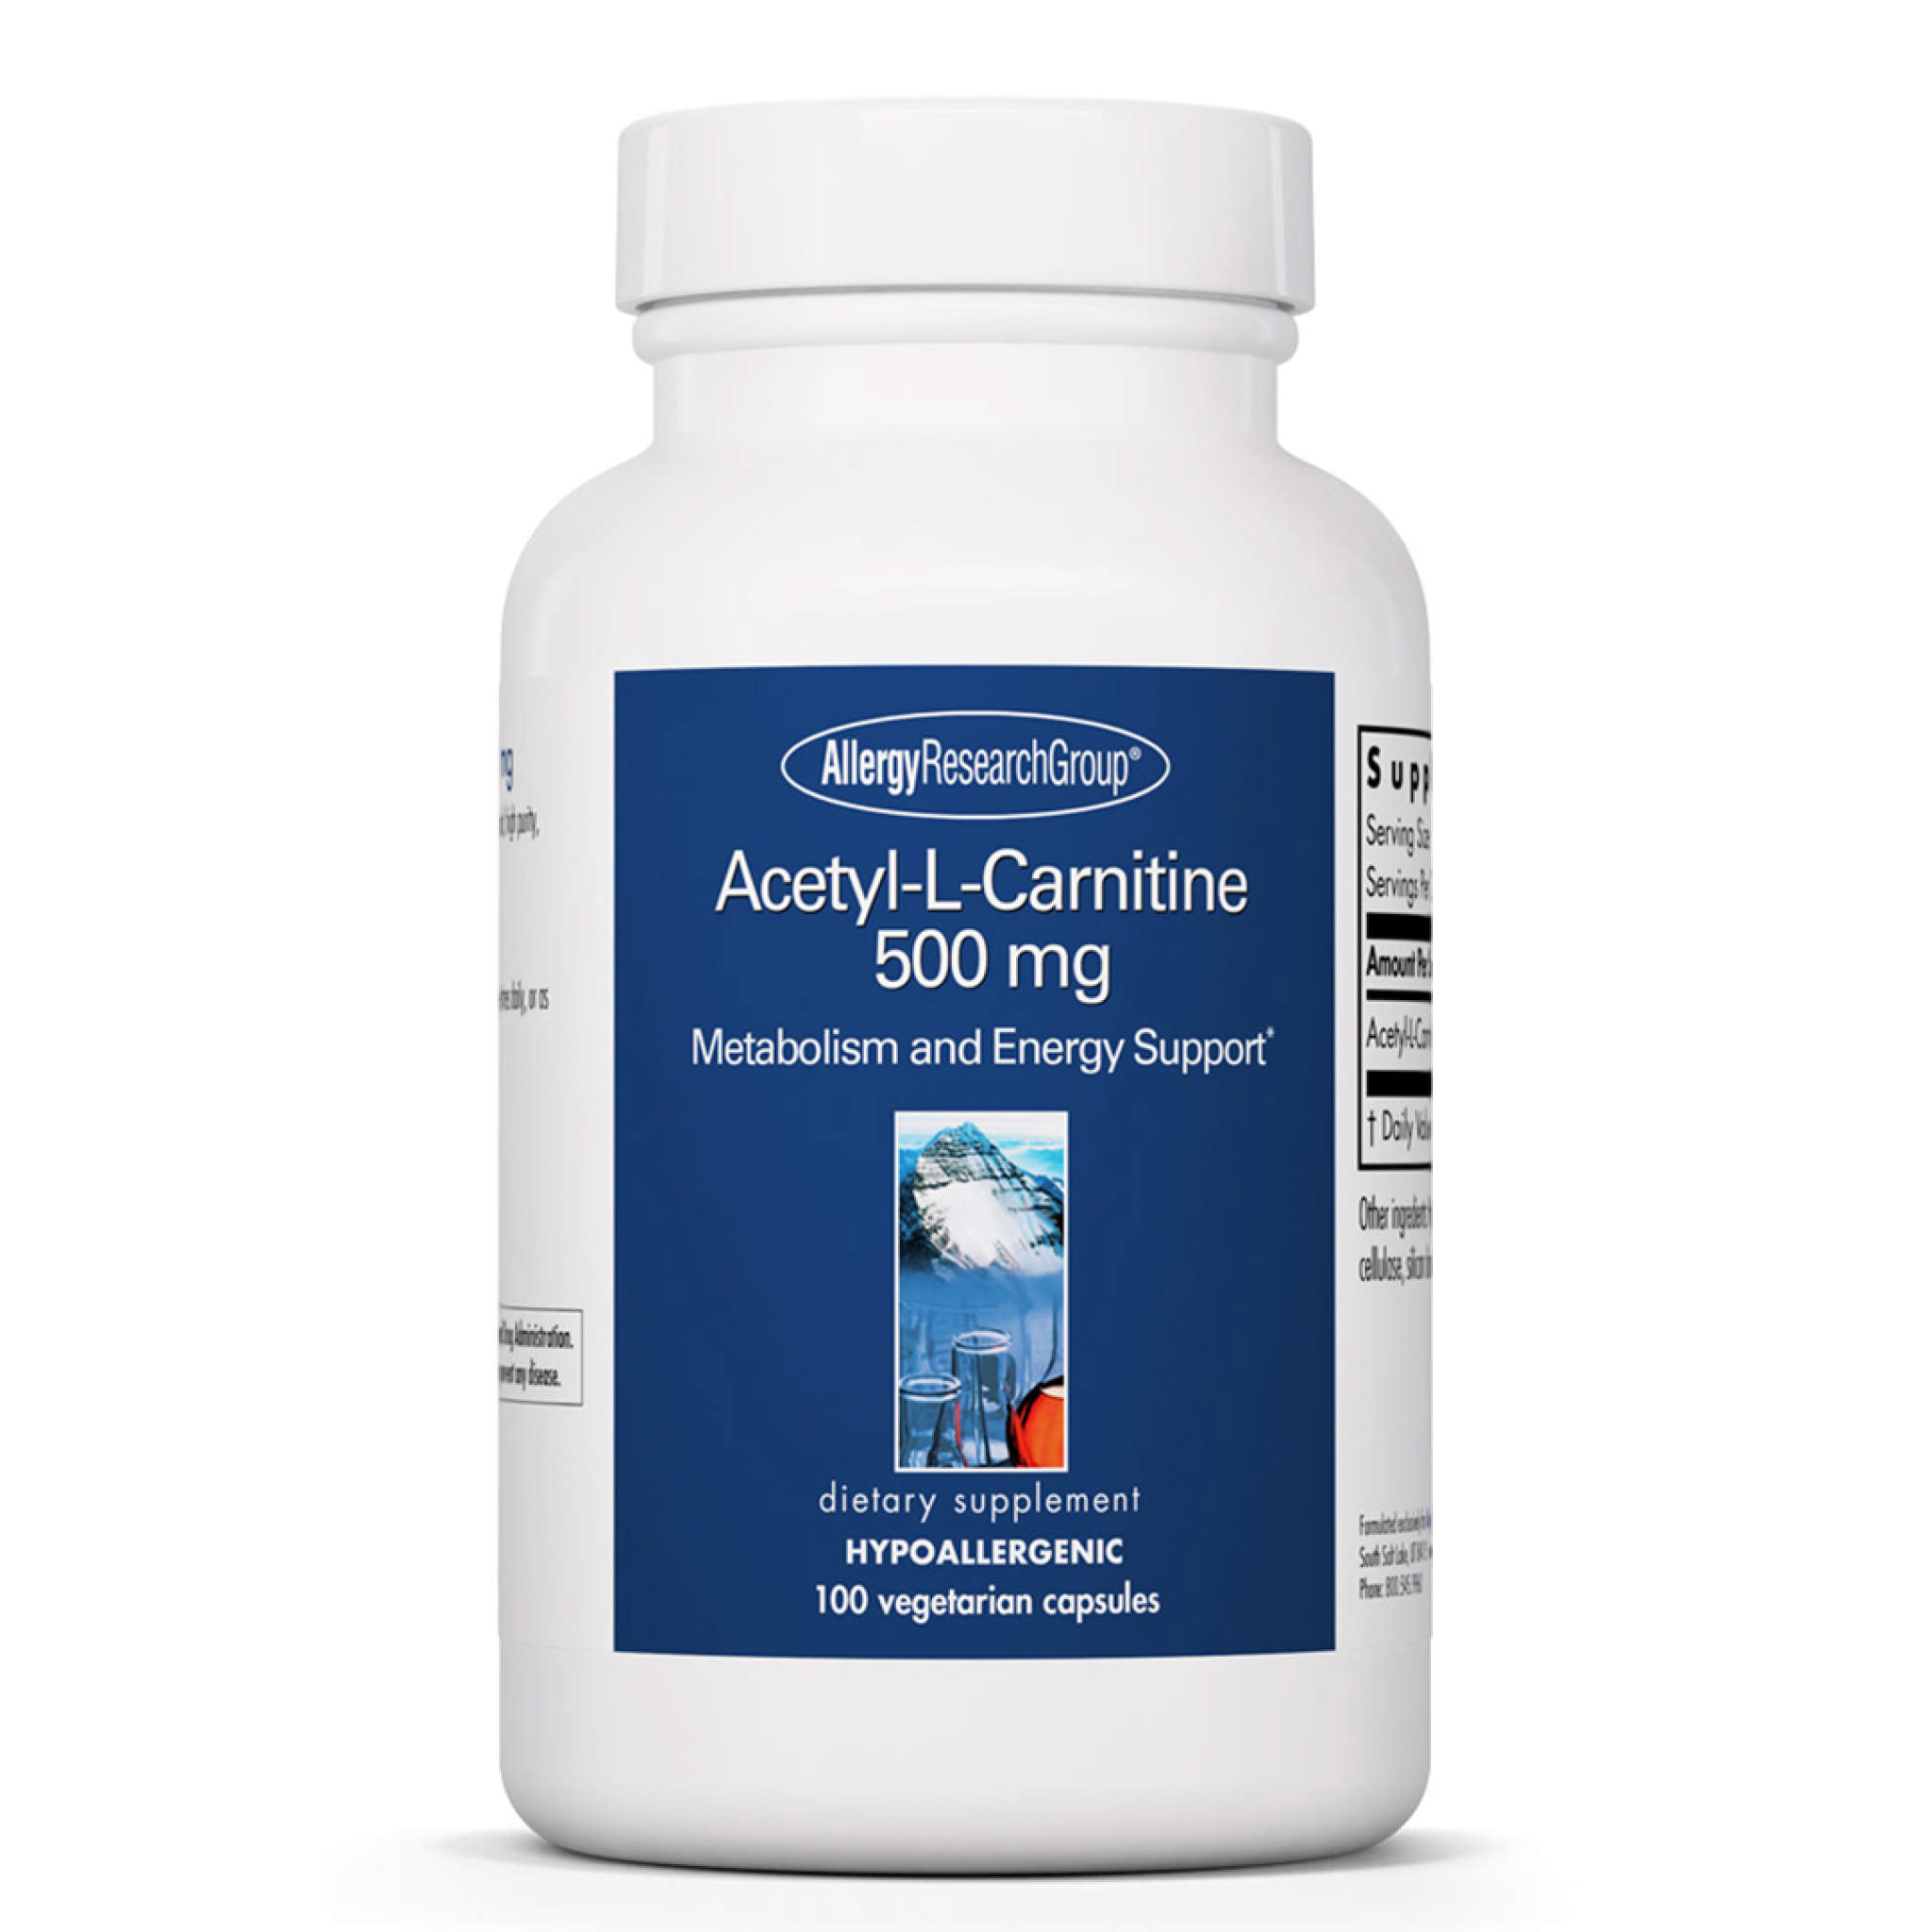 Allergy Research Group - Acetyl L Carnitine 500 mg